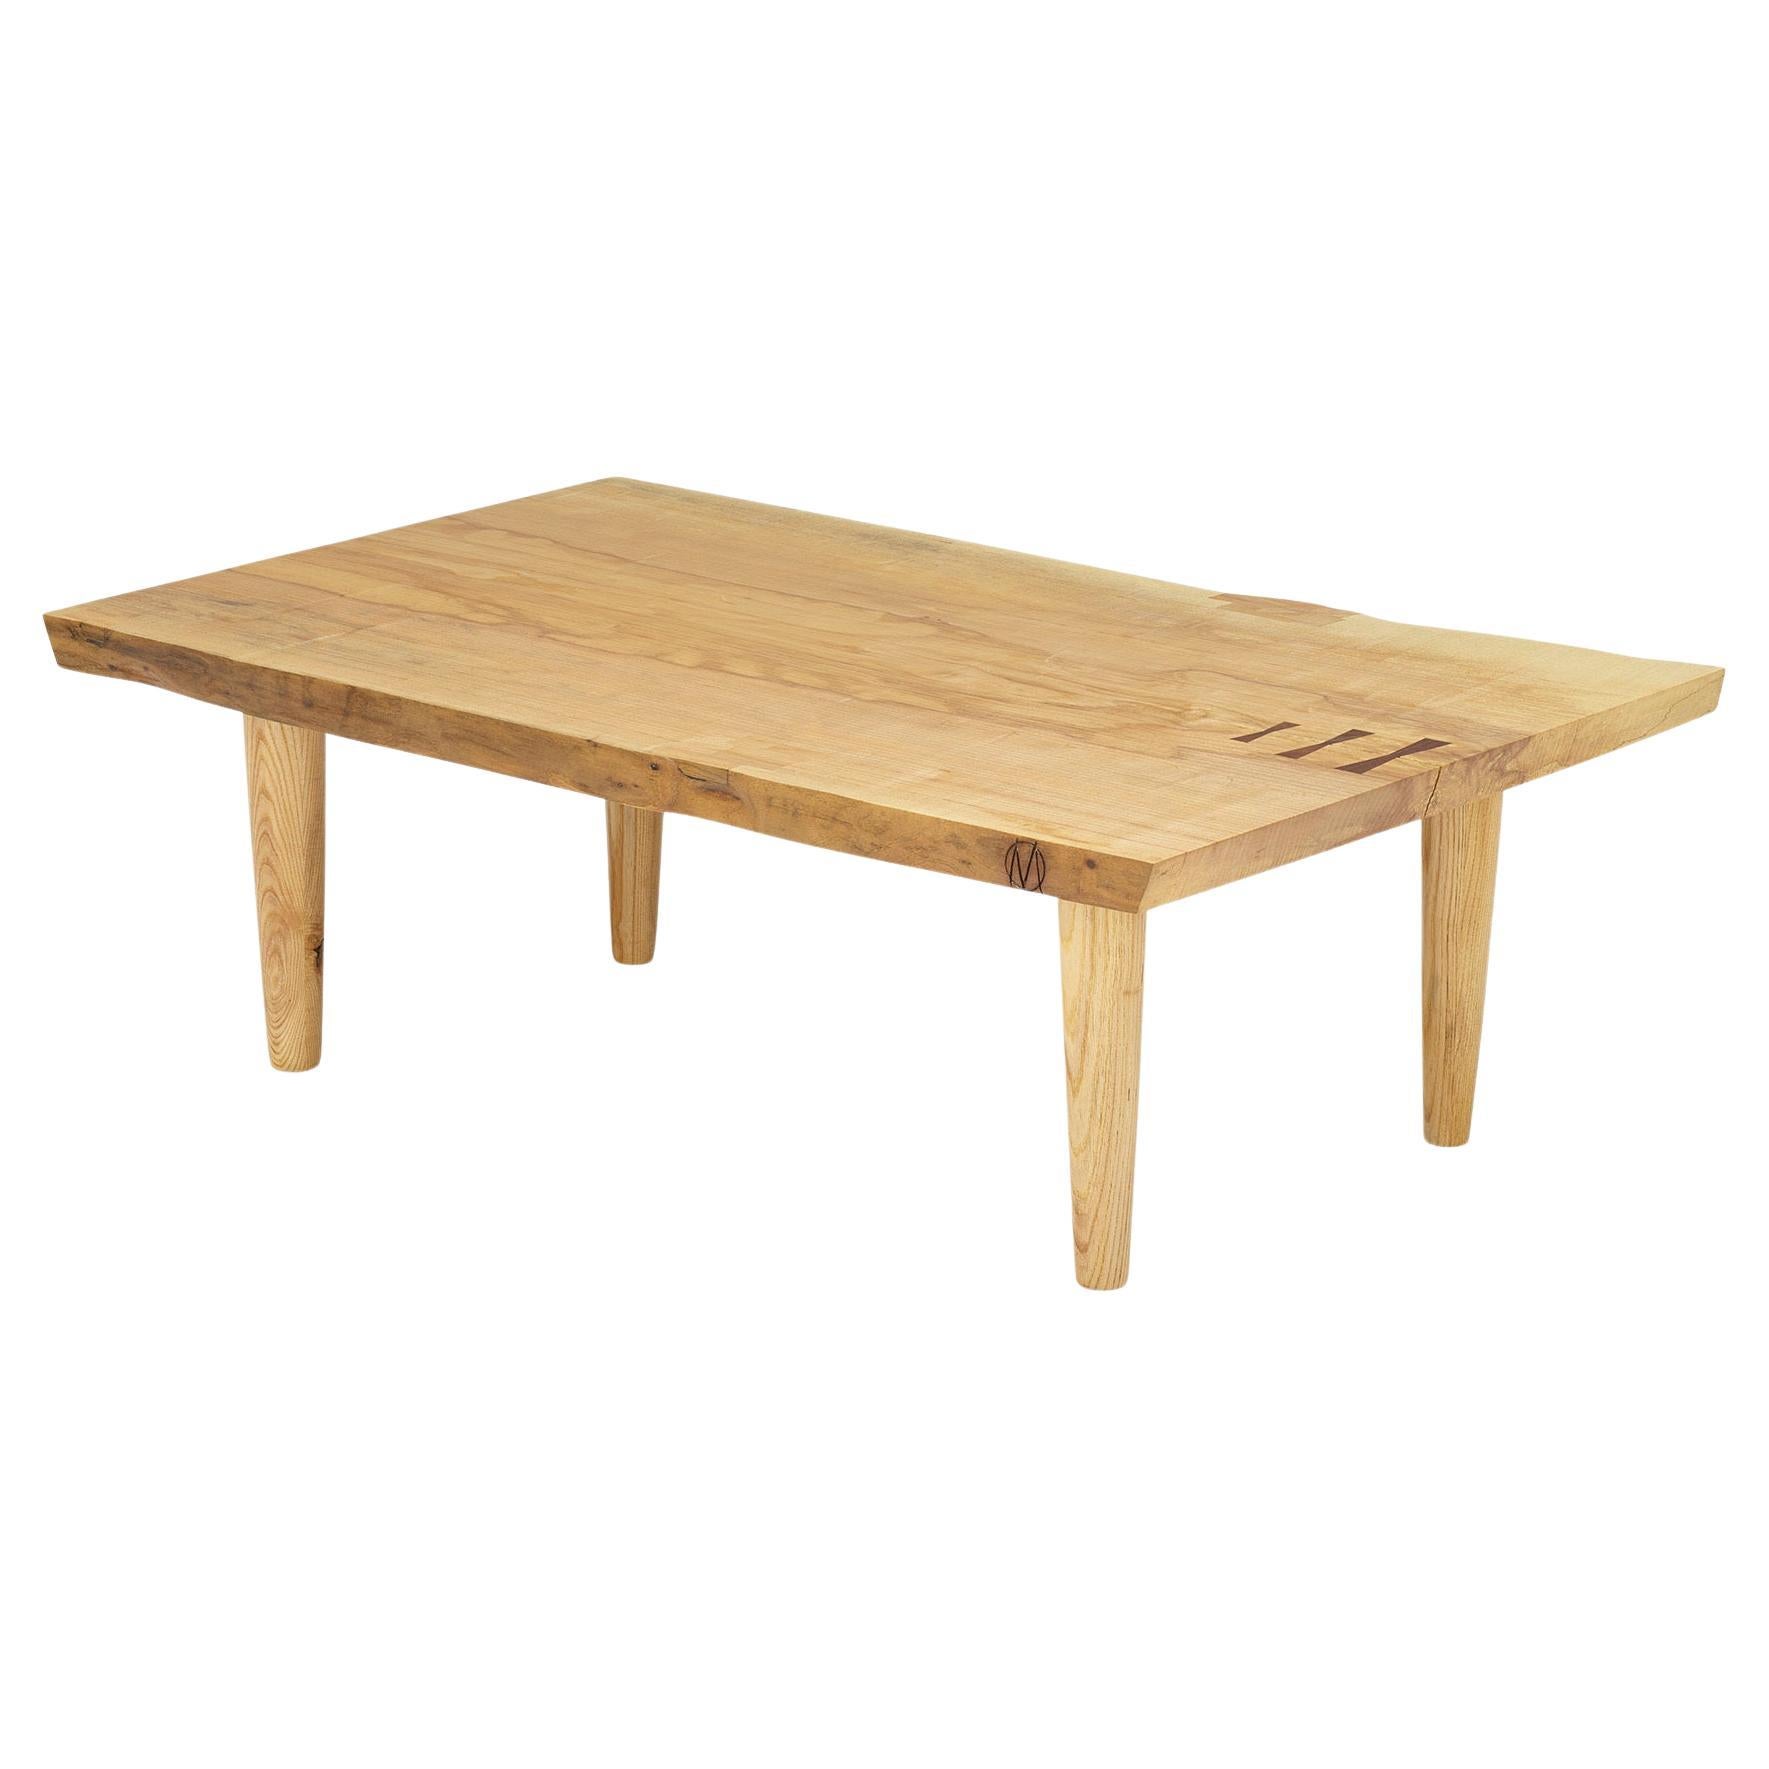 Michael Oates - New Hope Ash Slab Coffee Table For Sale